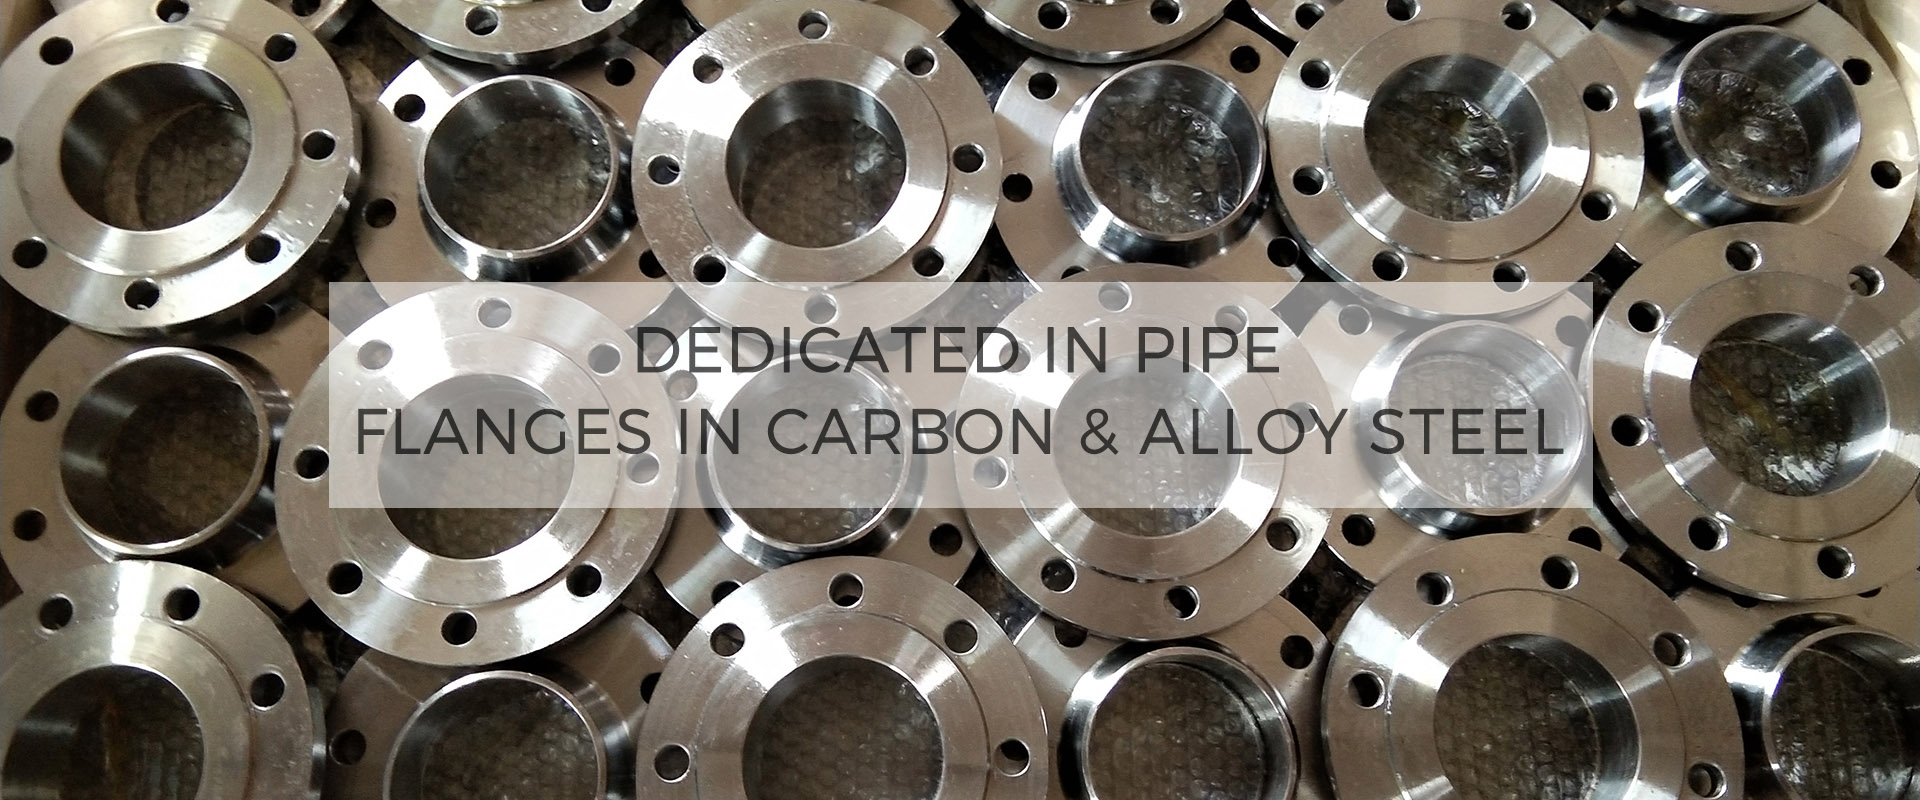 Pipe Flanges and pipe fittings leader in Carbon & Alloy Steel